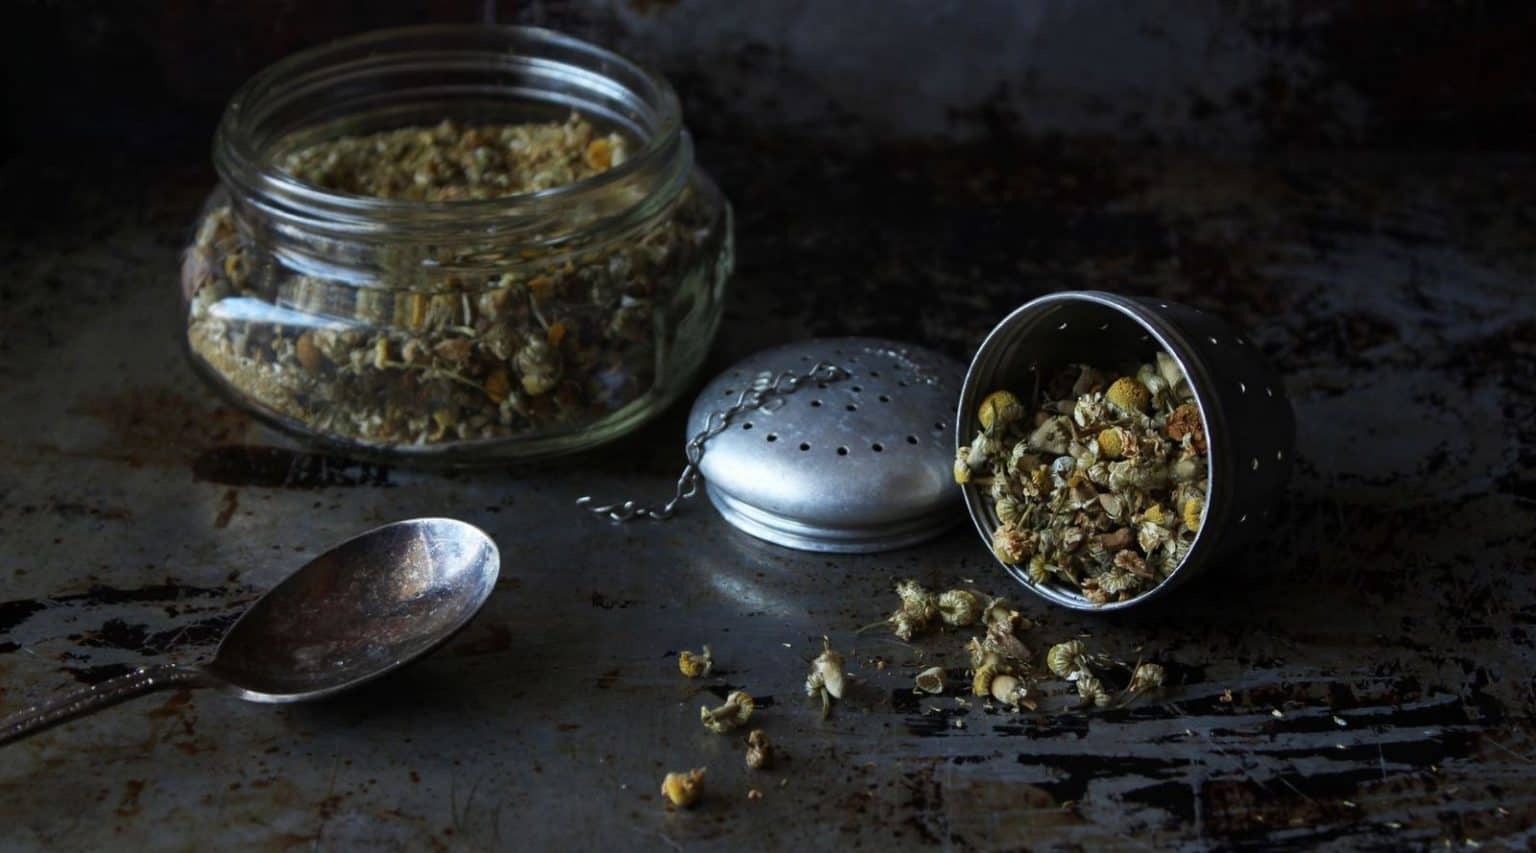 how and when can you reuse loose leaf tea?